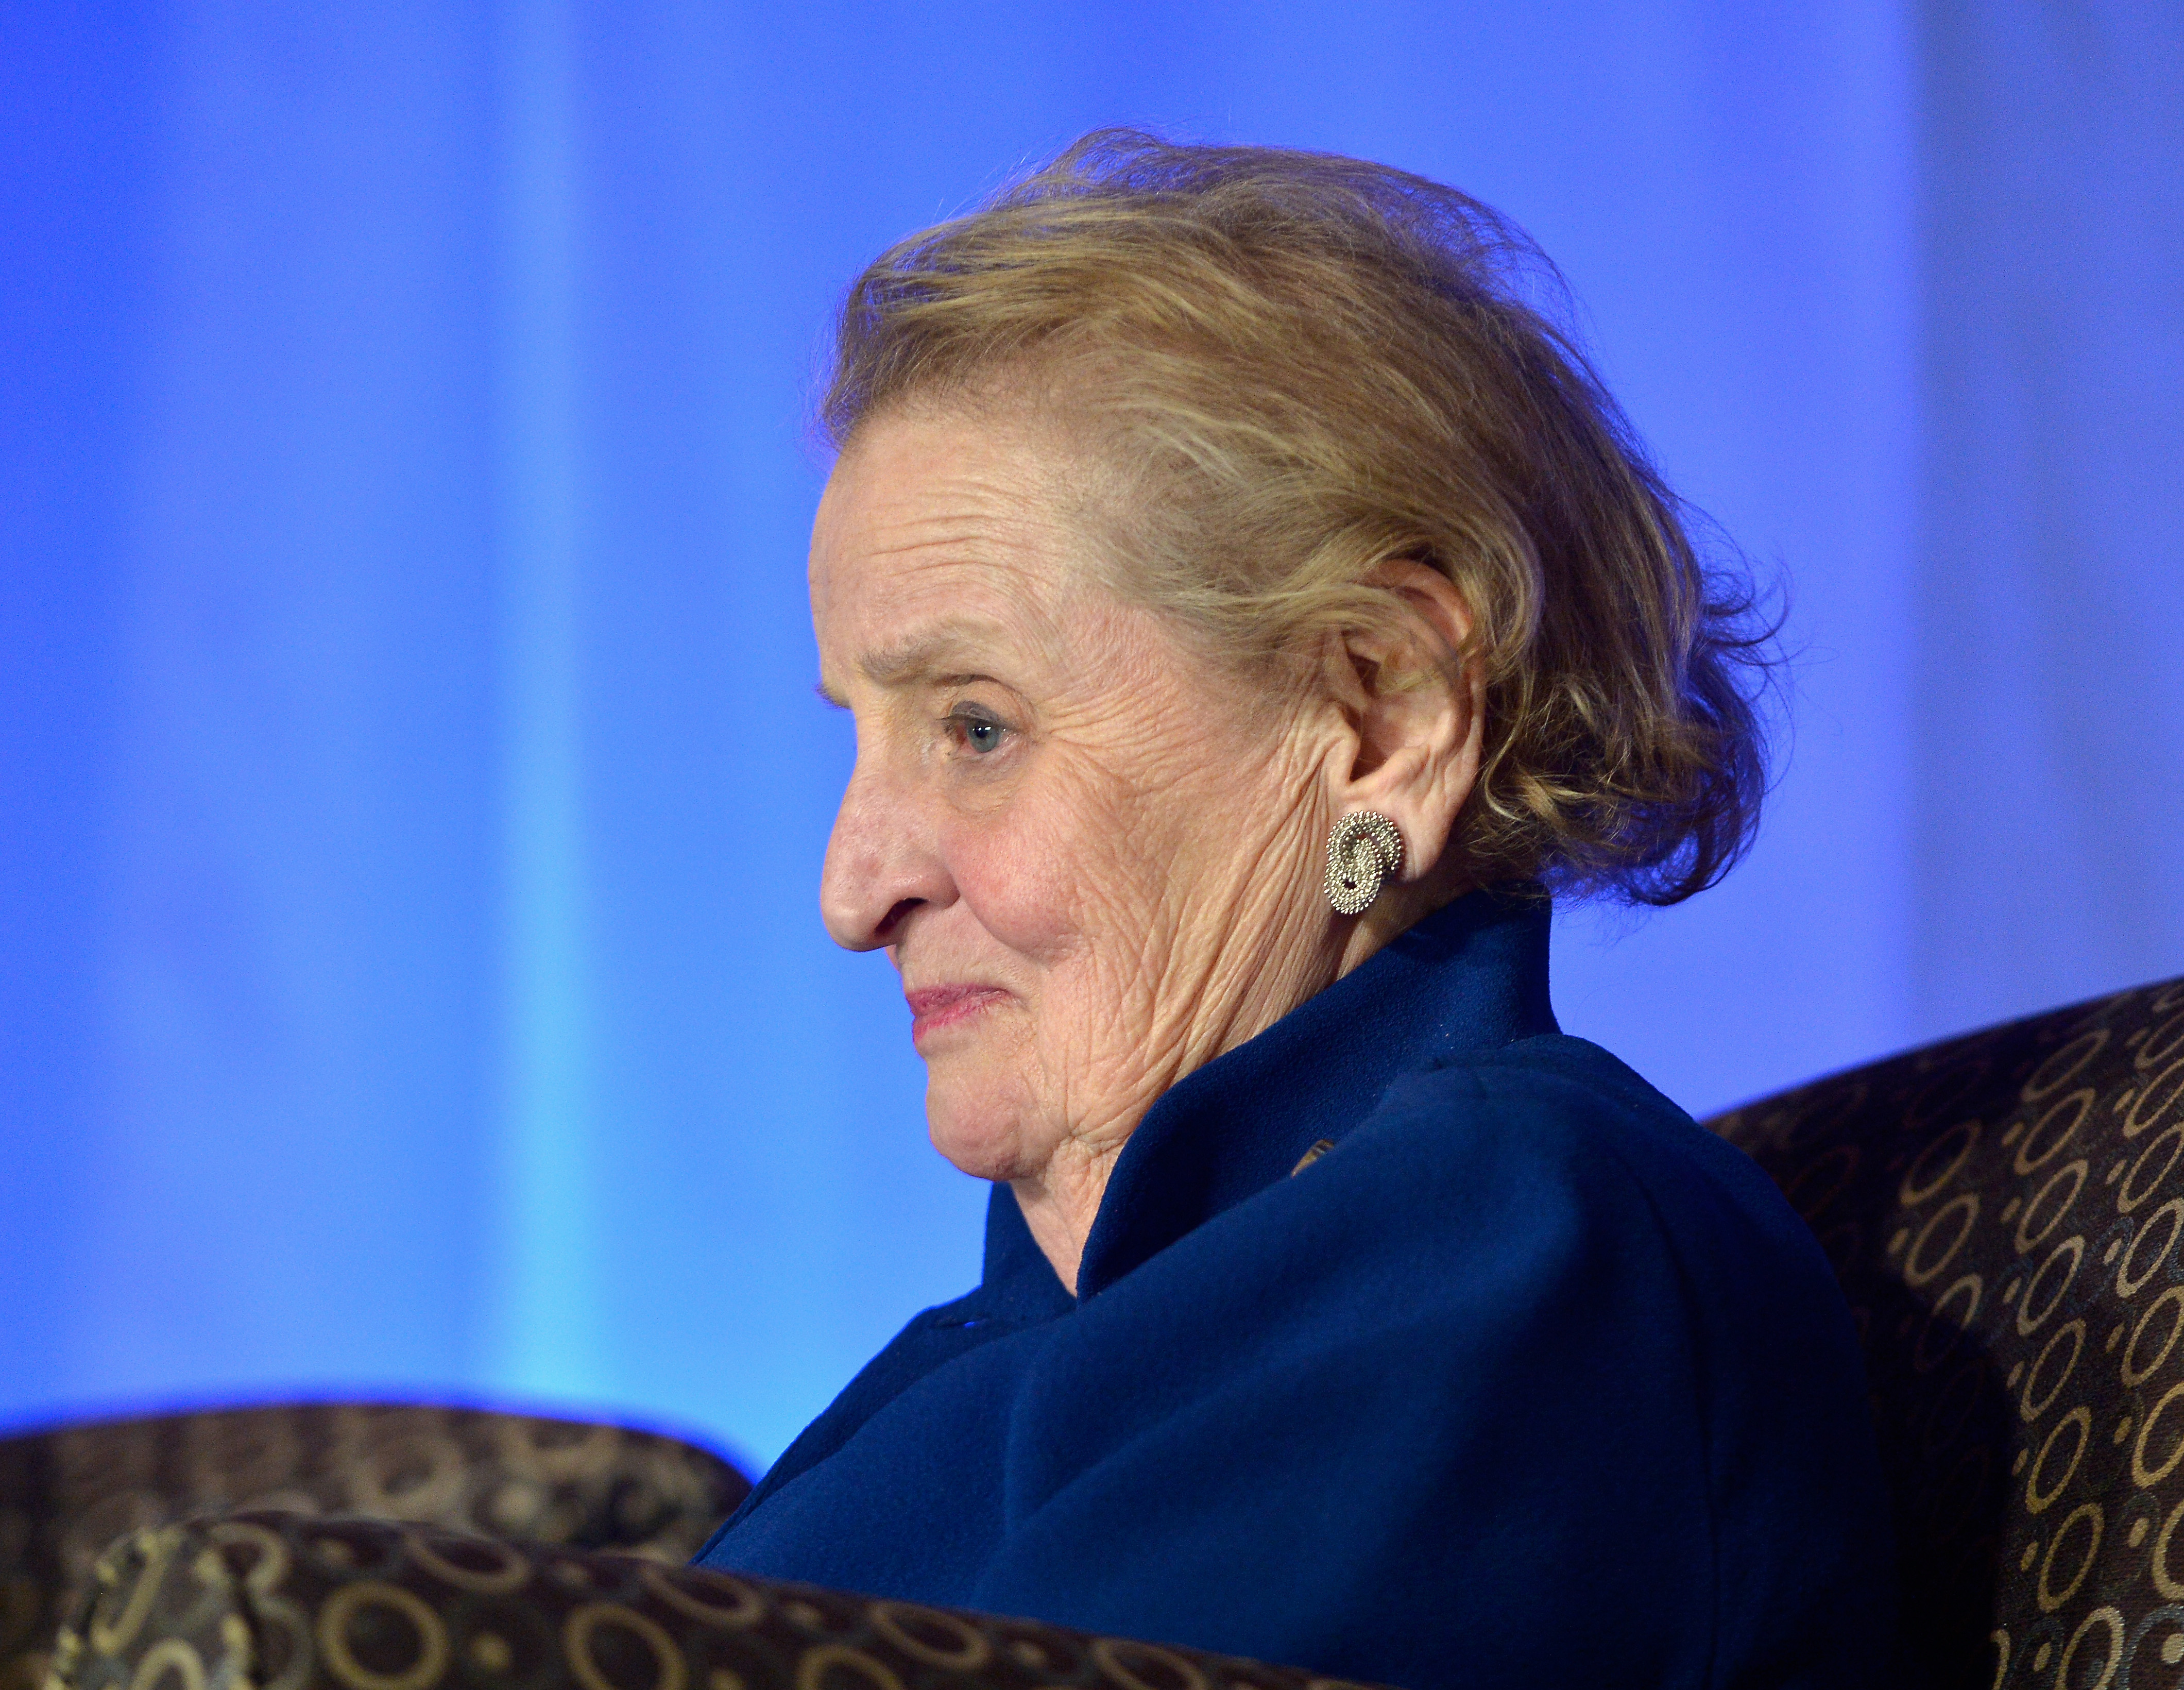 Former U.S. Secratary of State Madeleine K. Albright speaks at the Albright Institute Presents 'A Public Dialogue: Addressing Global Inequality' at Wellesly College in Wellesley, Mass., on Jan. 31, 2016. (Paul Marotta)